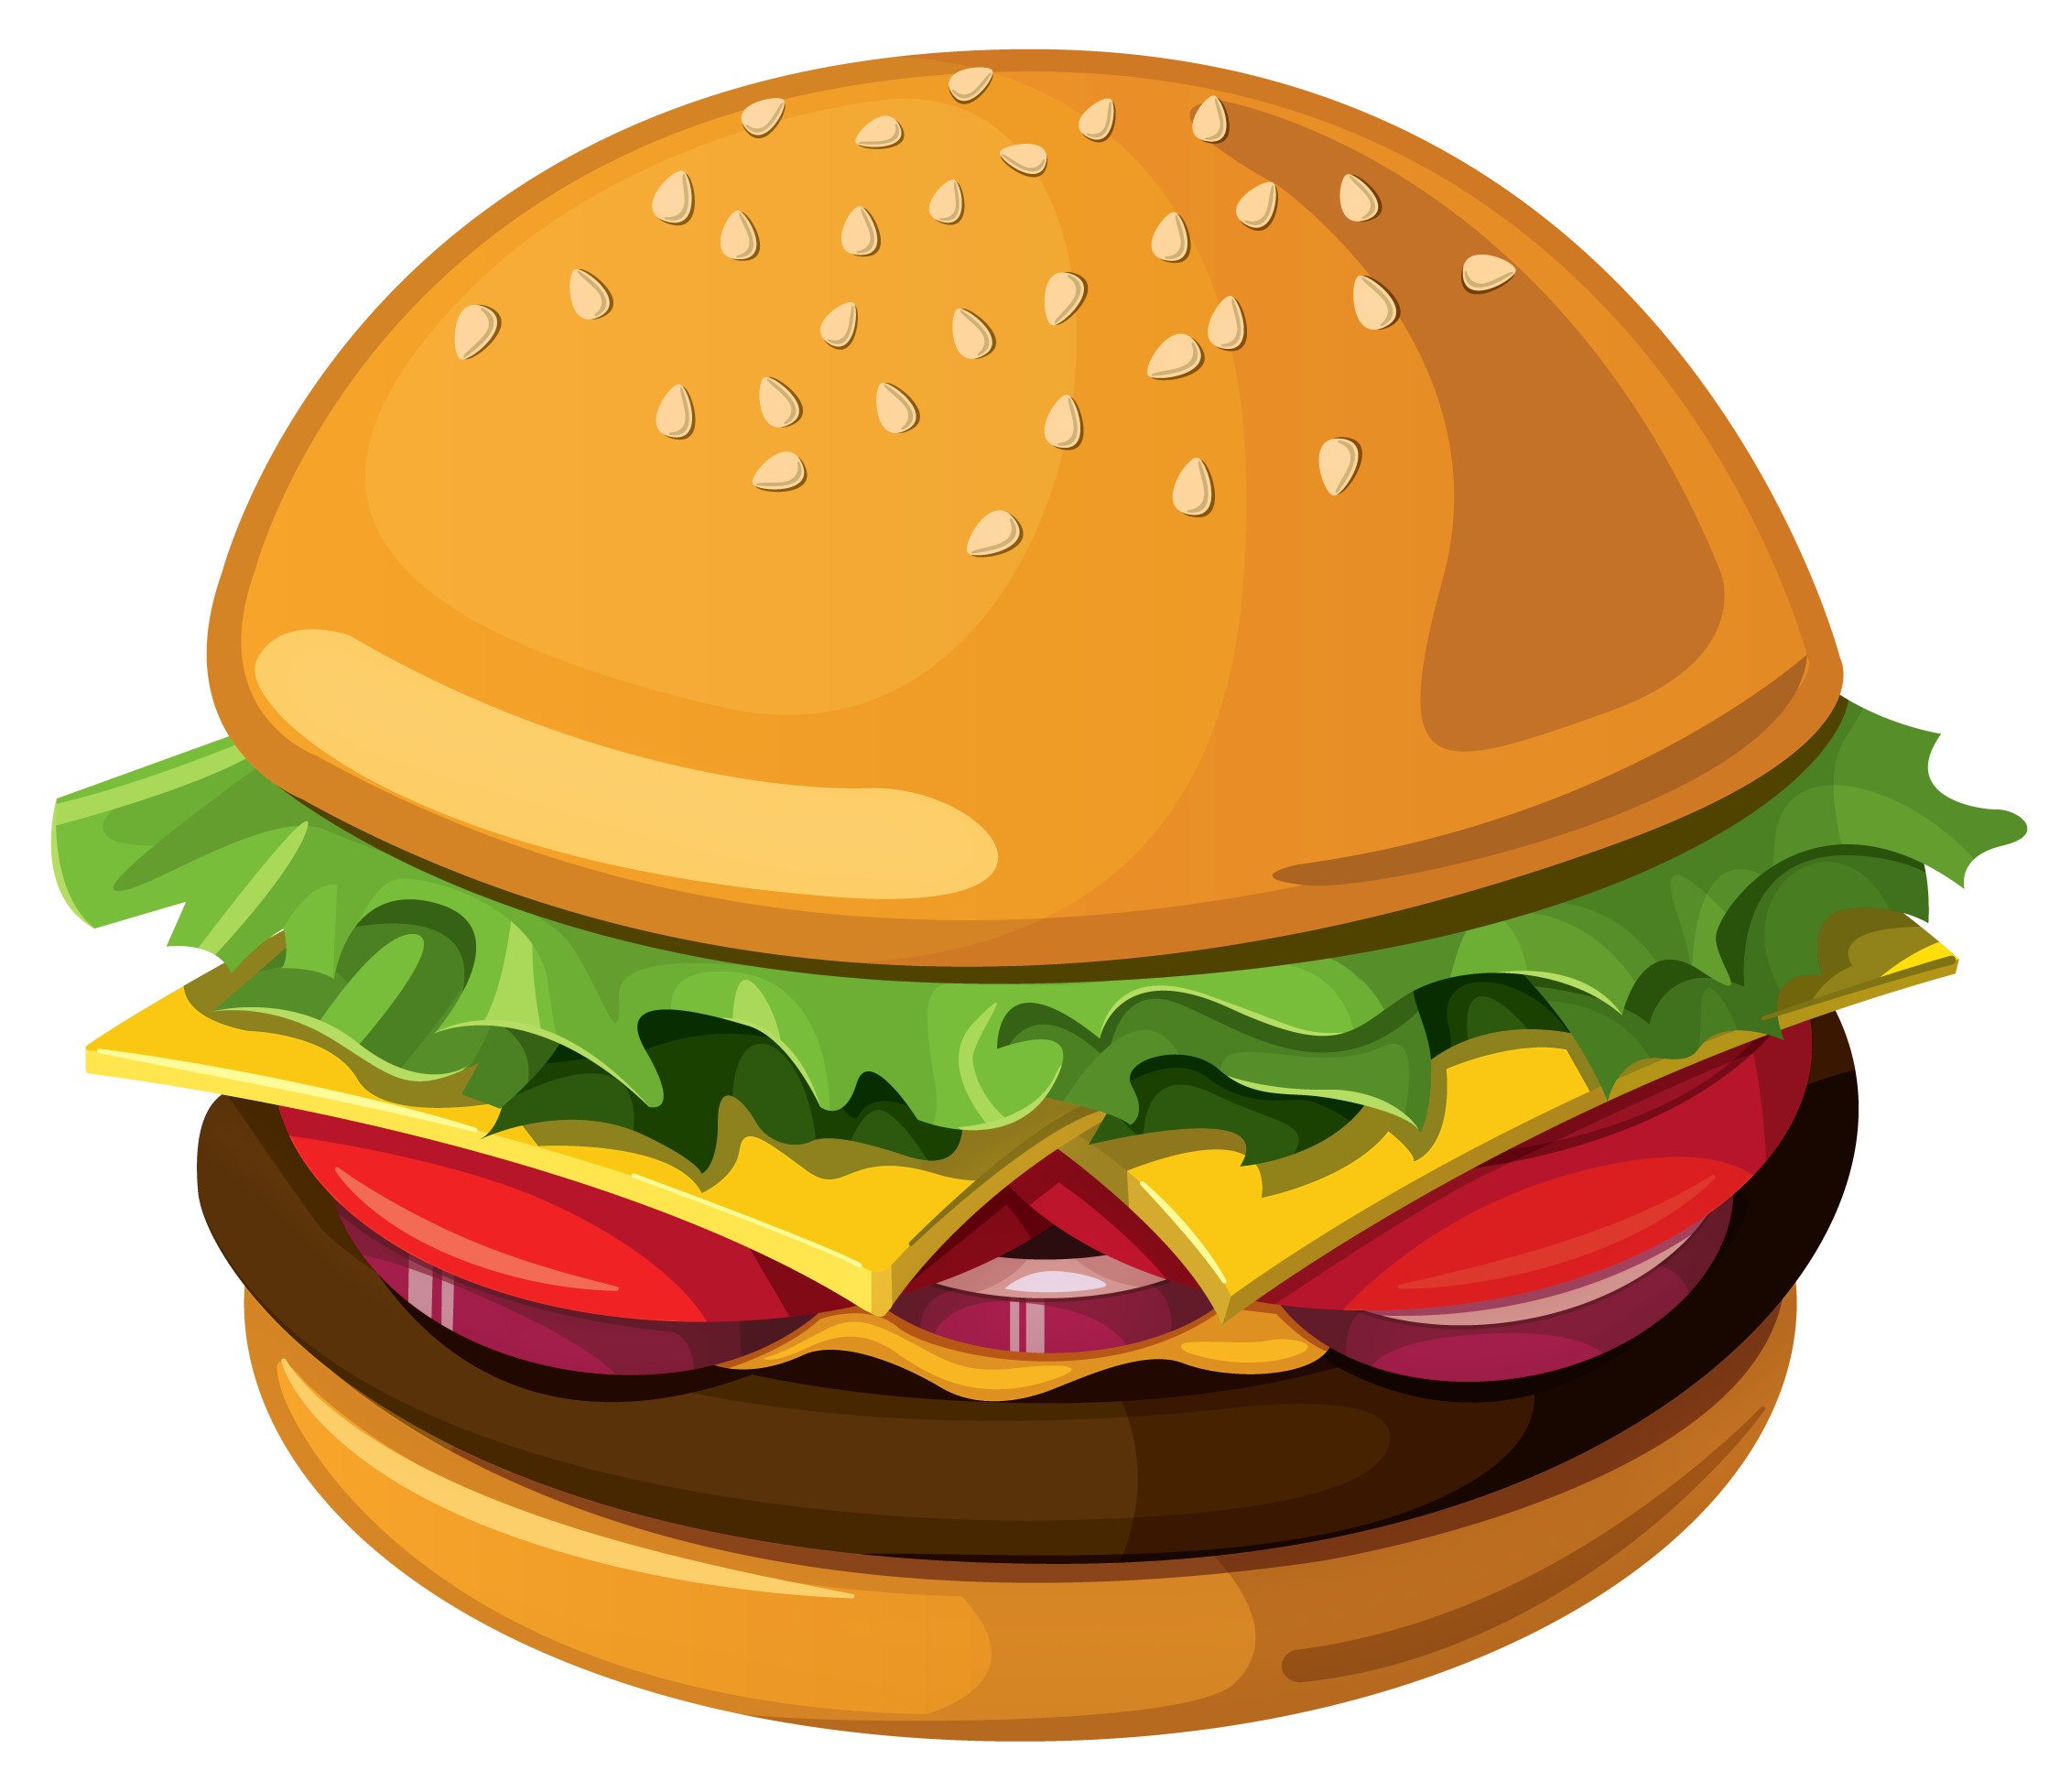 Image de burger fromage bacon PNG